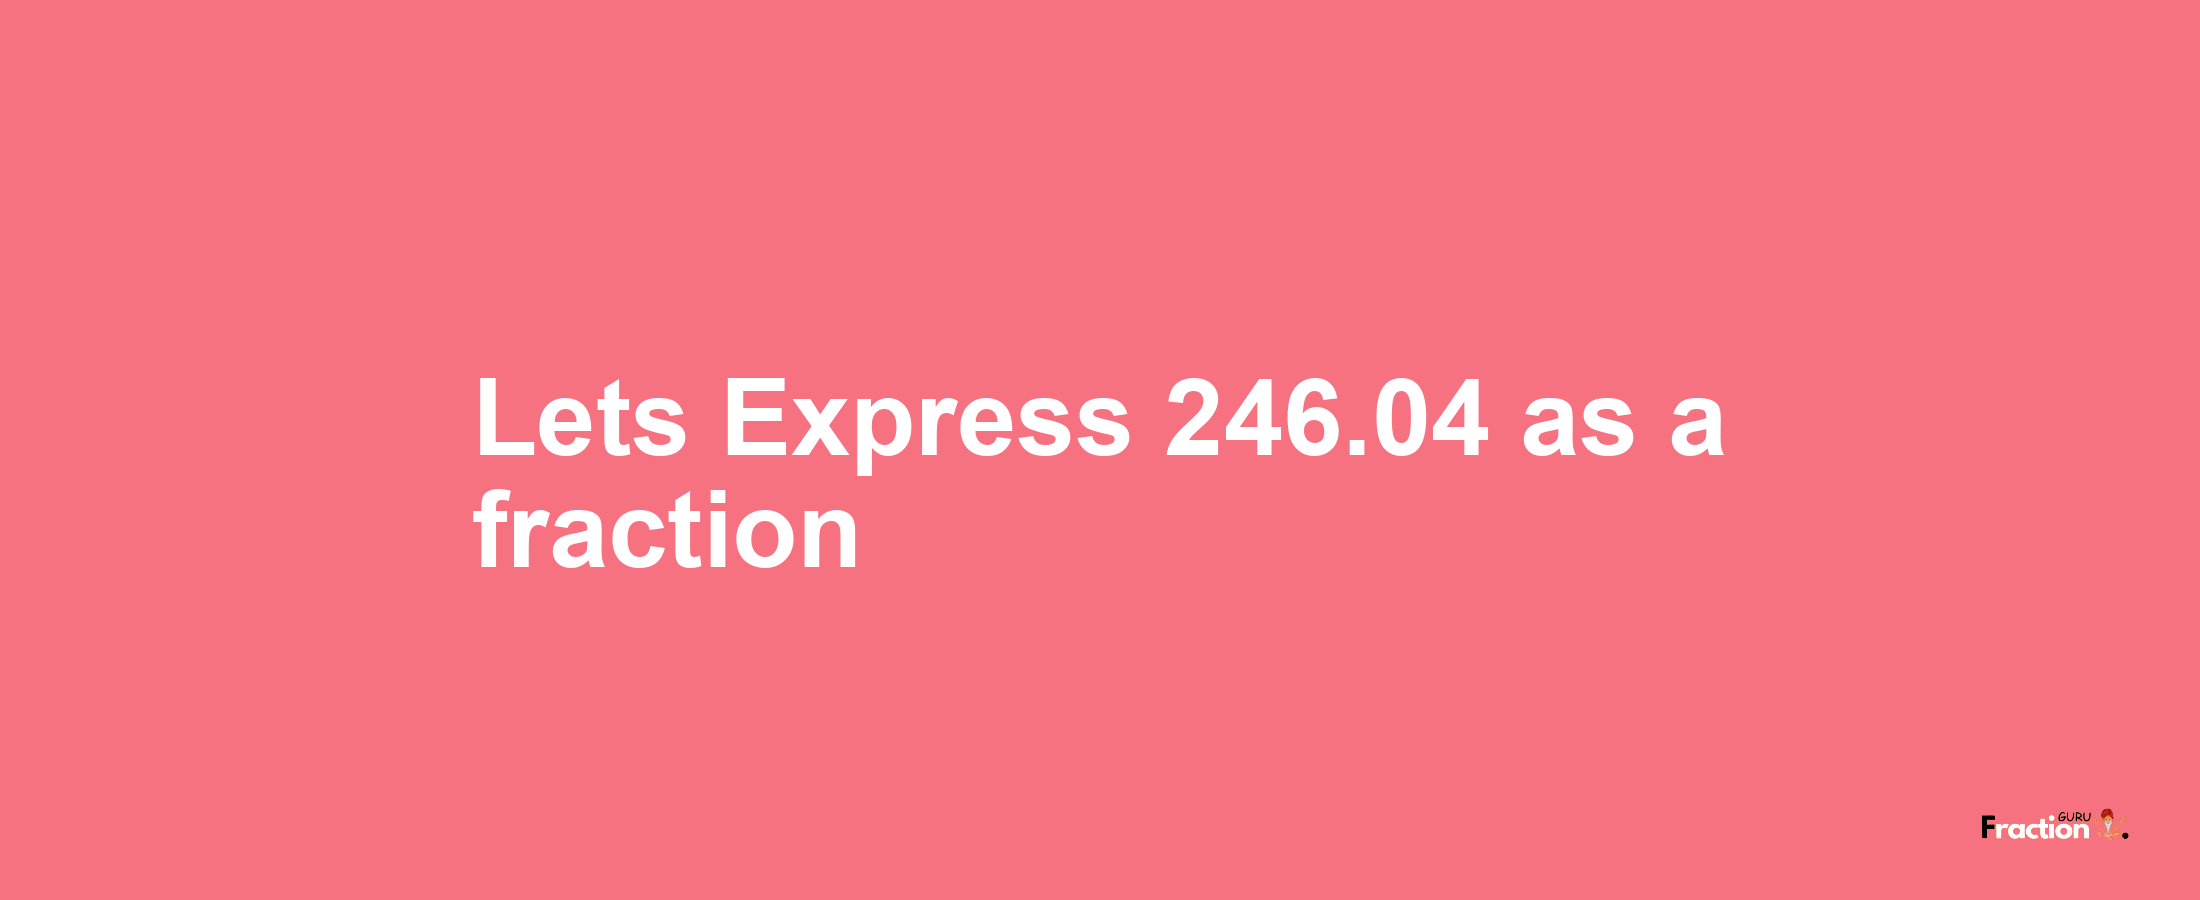 Lets Express 246.04 as afraction